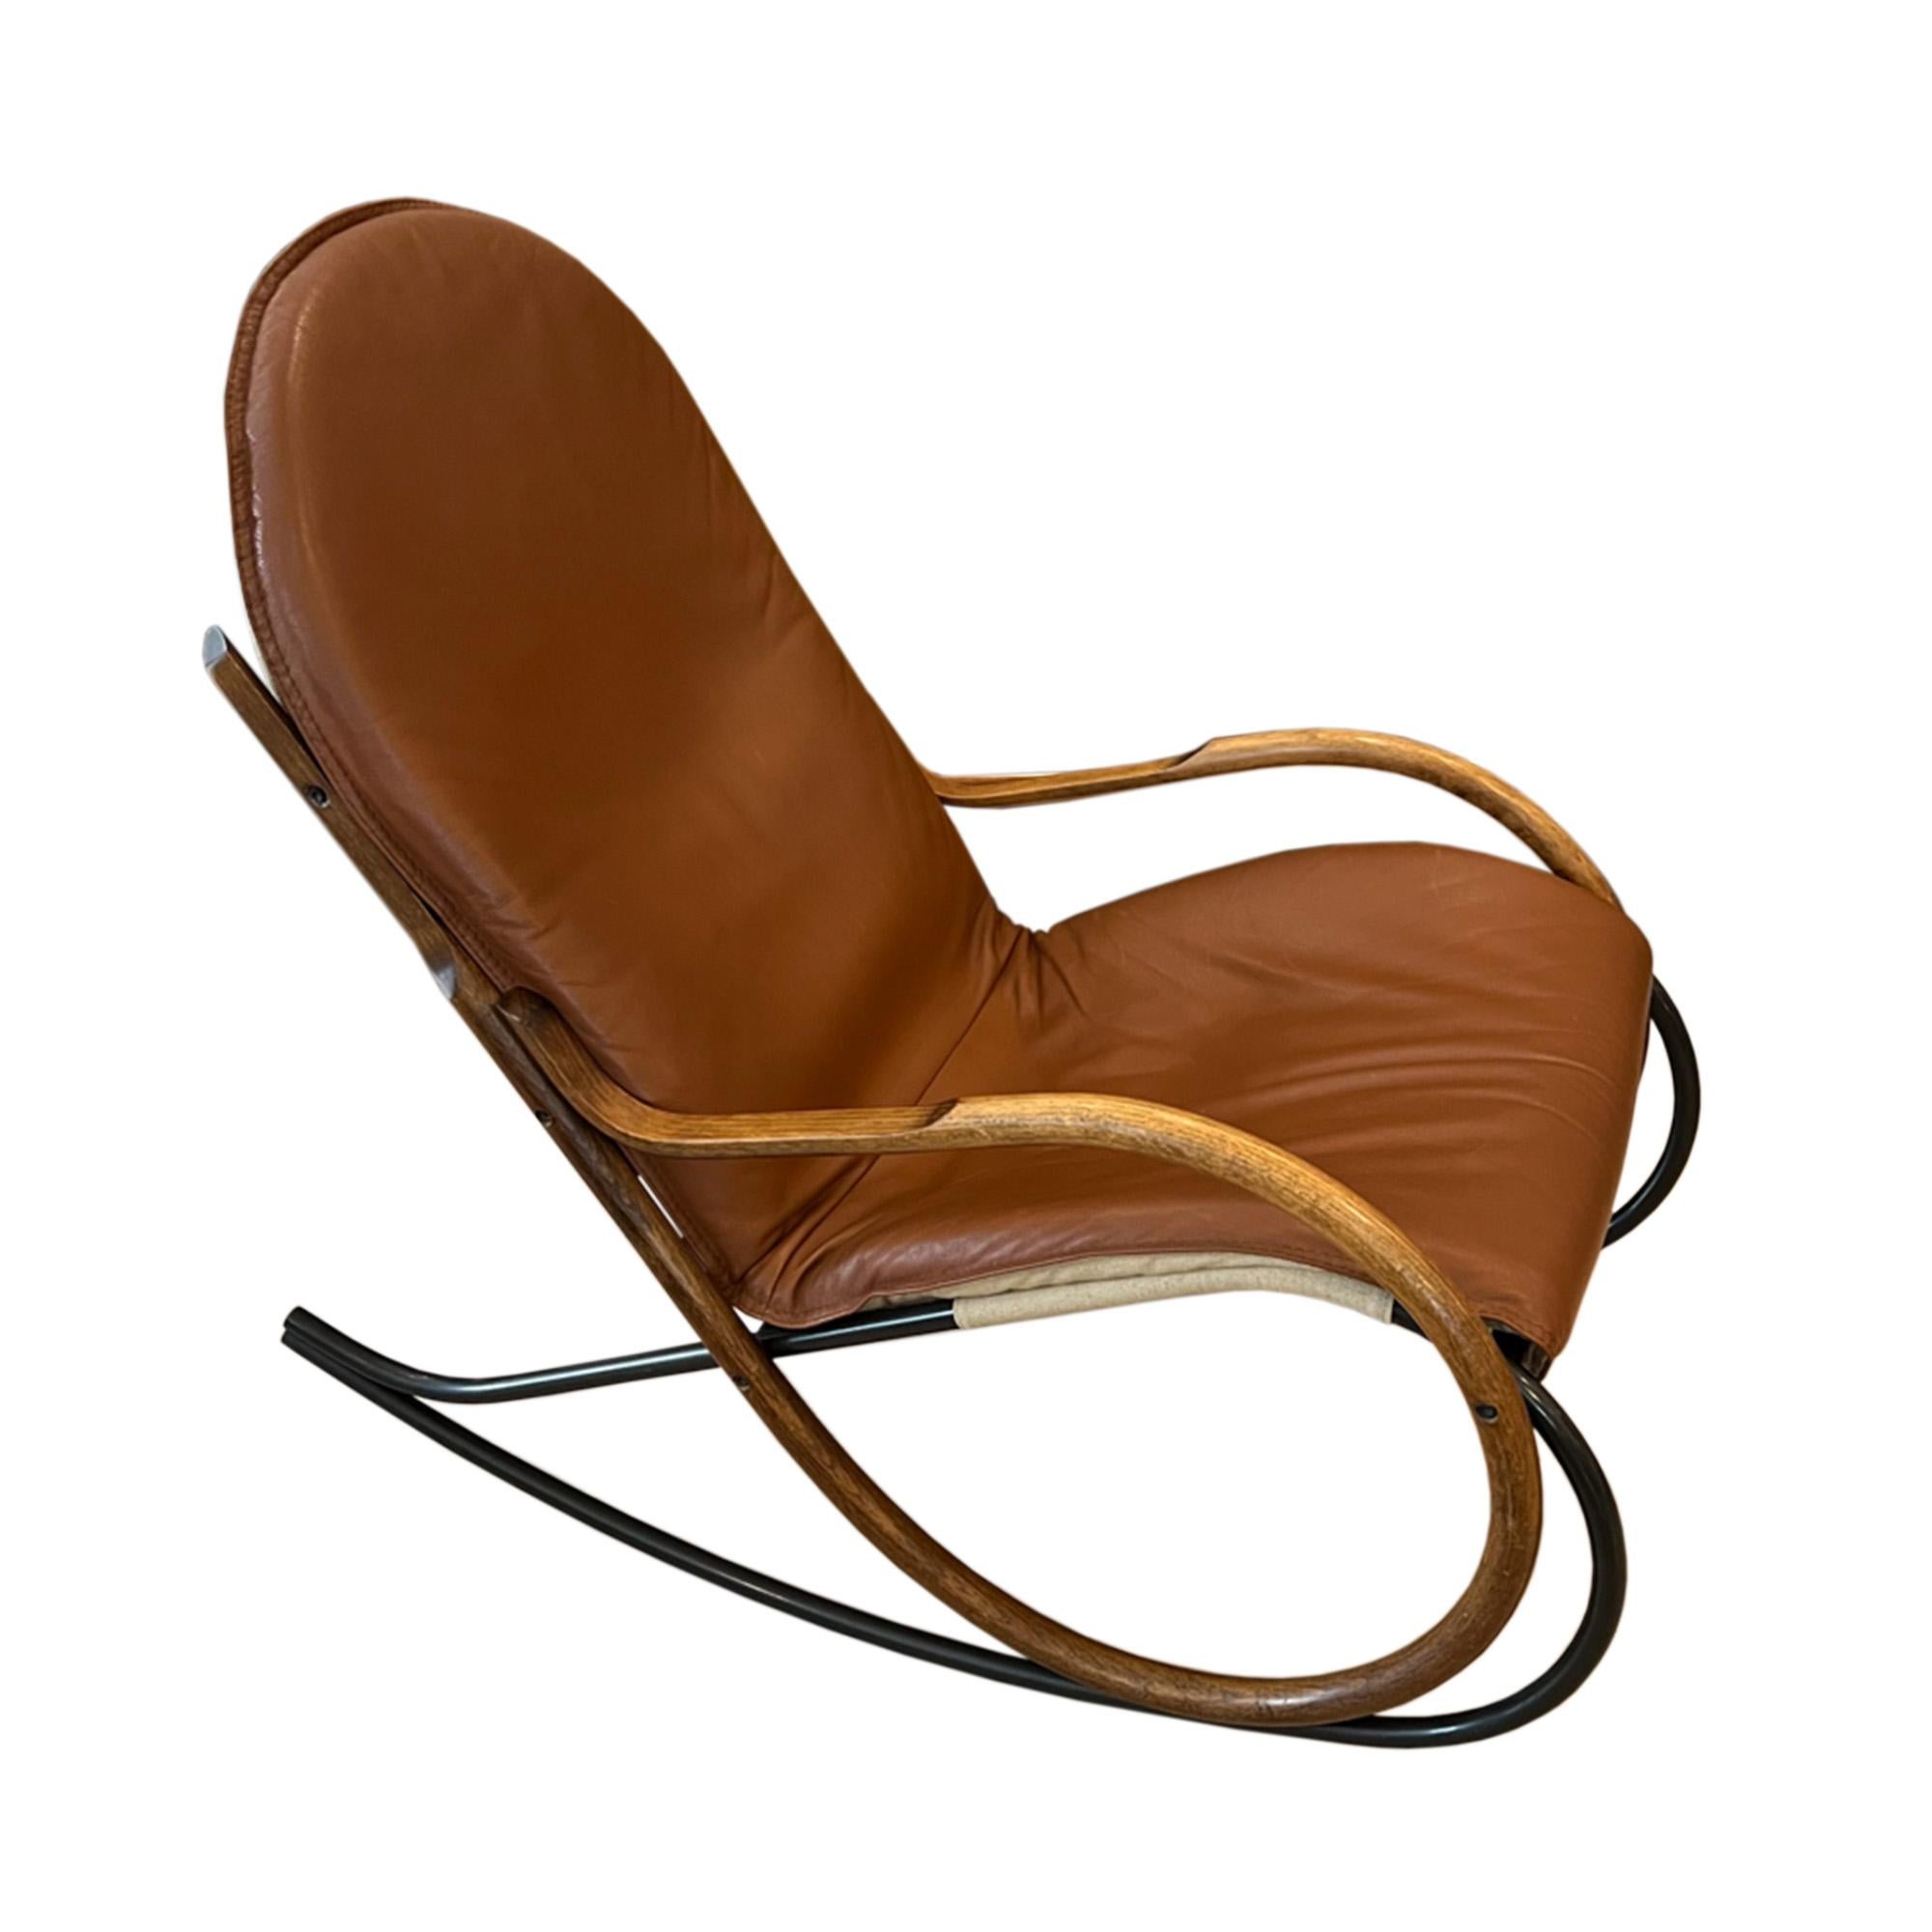 This elegant rocking chair was designed by Paul Tuttle for Strässle in Switzerland in the 1970s - the 'Nonna' model. 

The frame is made from bent wood and metal while the seat is linen and tan leather.

Super comfortable and decorative - this chair